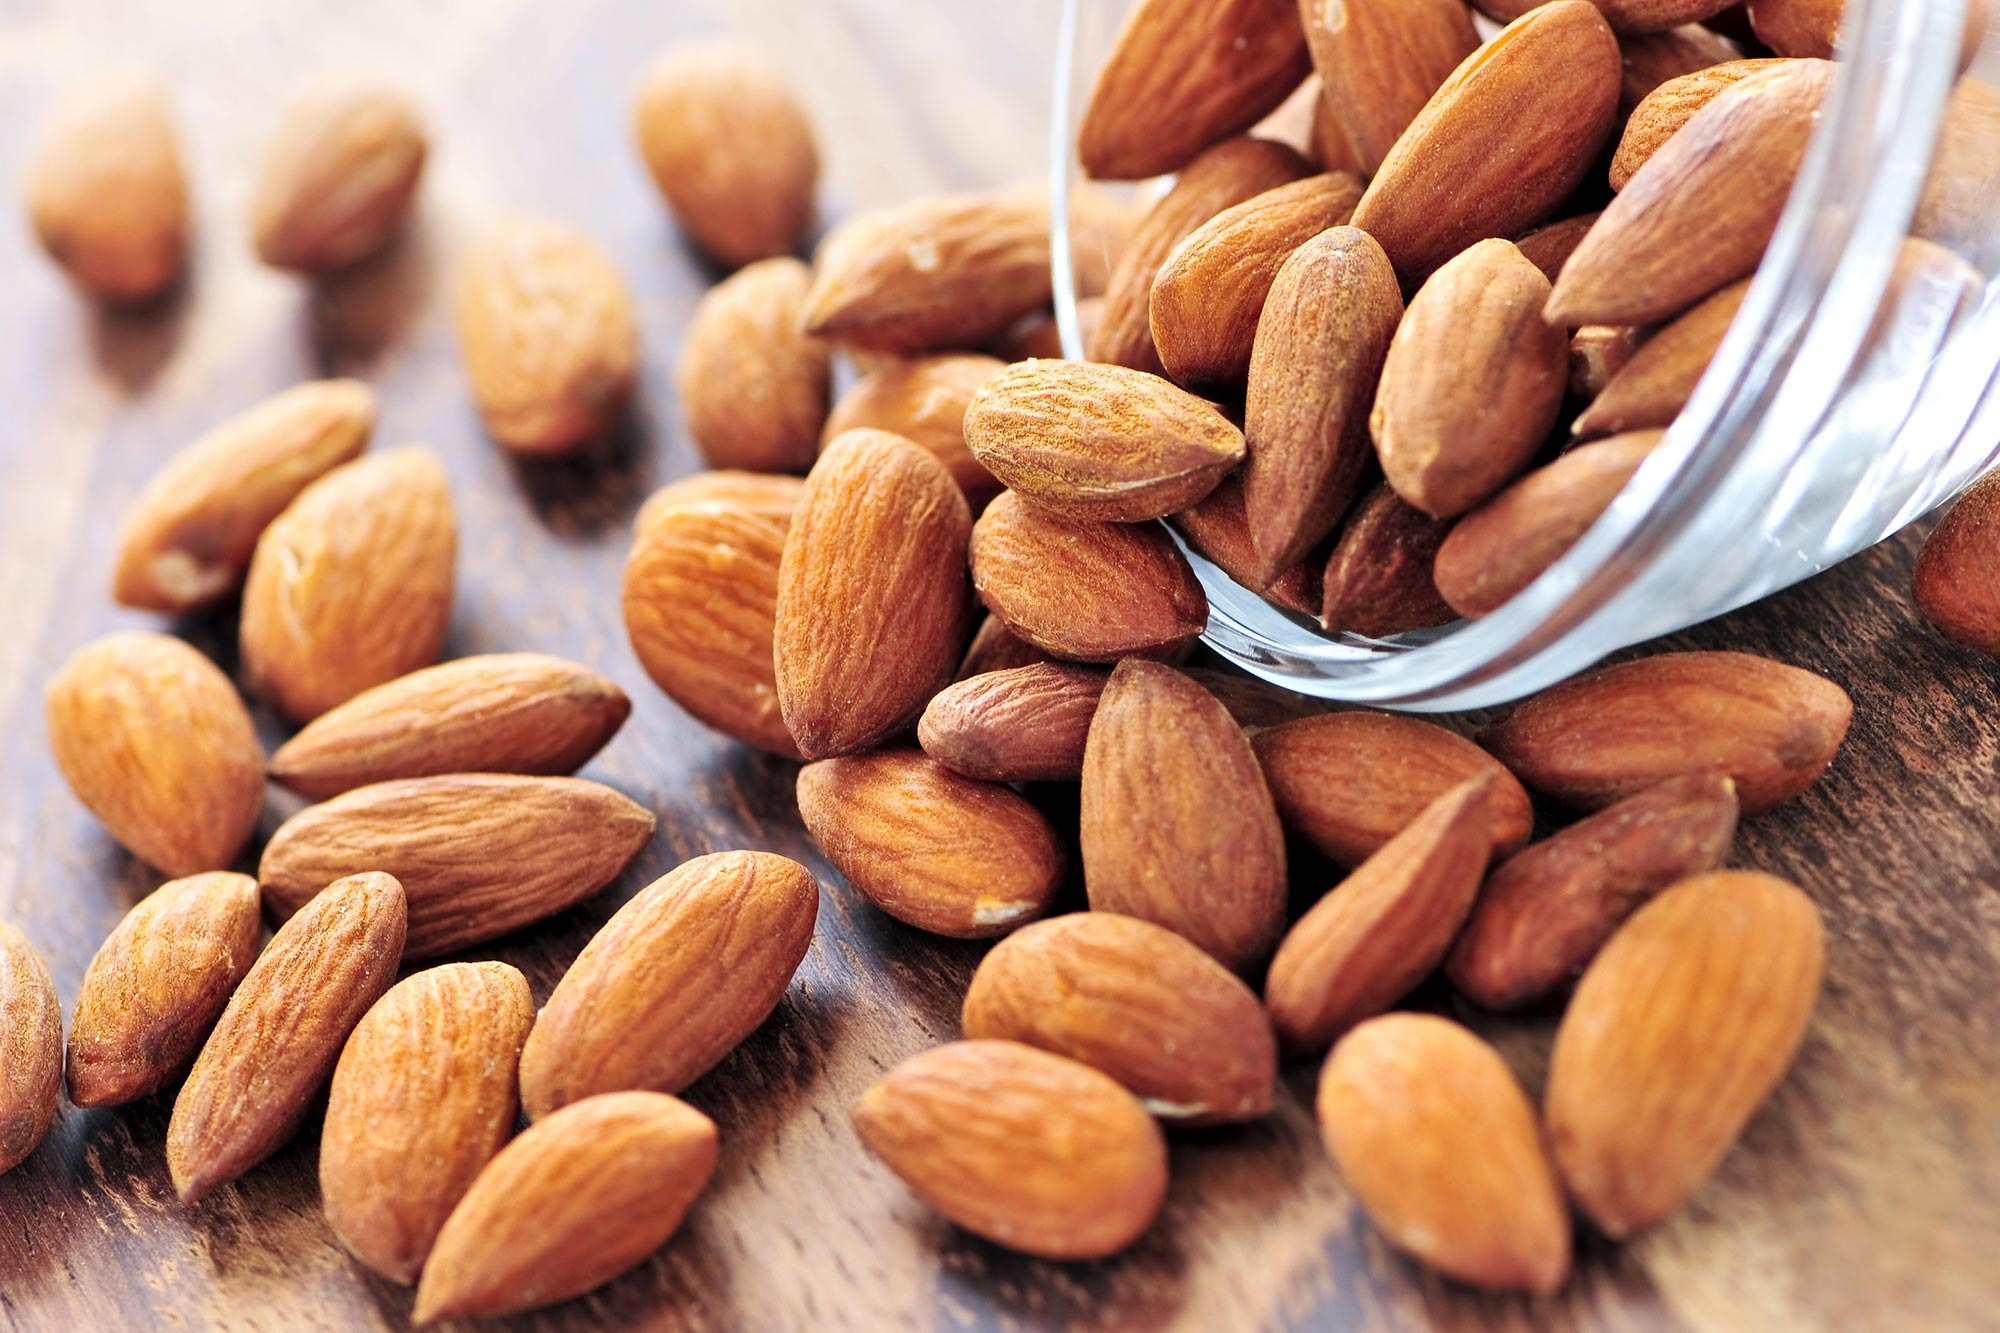 Snacking on Almonds Can Help You Lose Weight